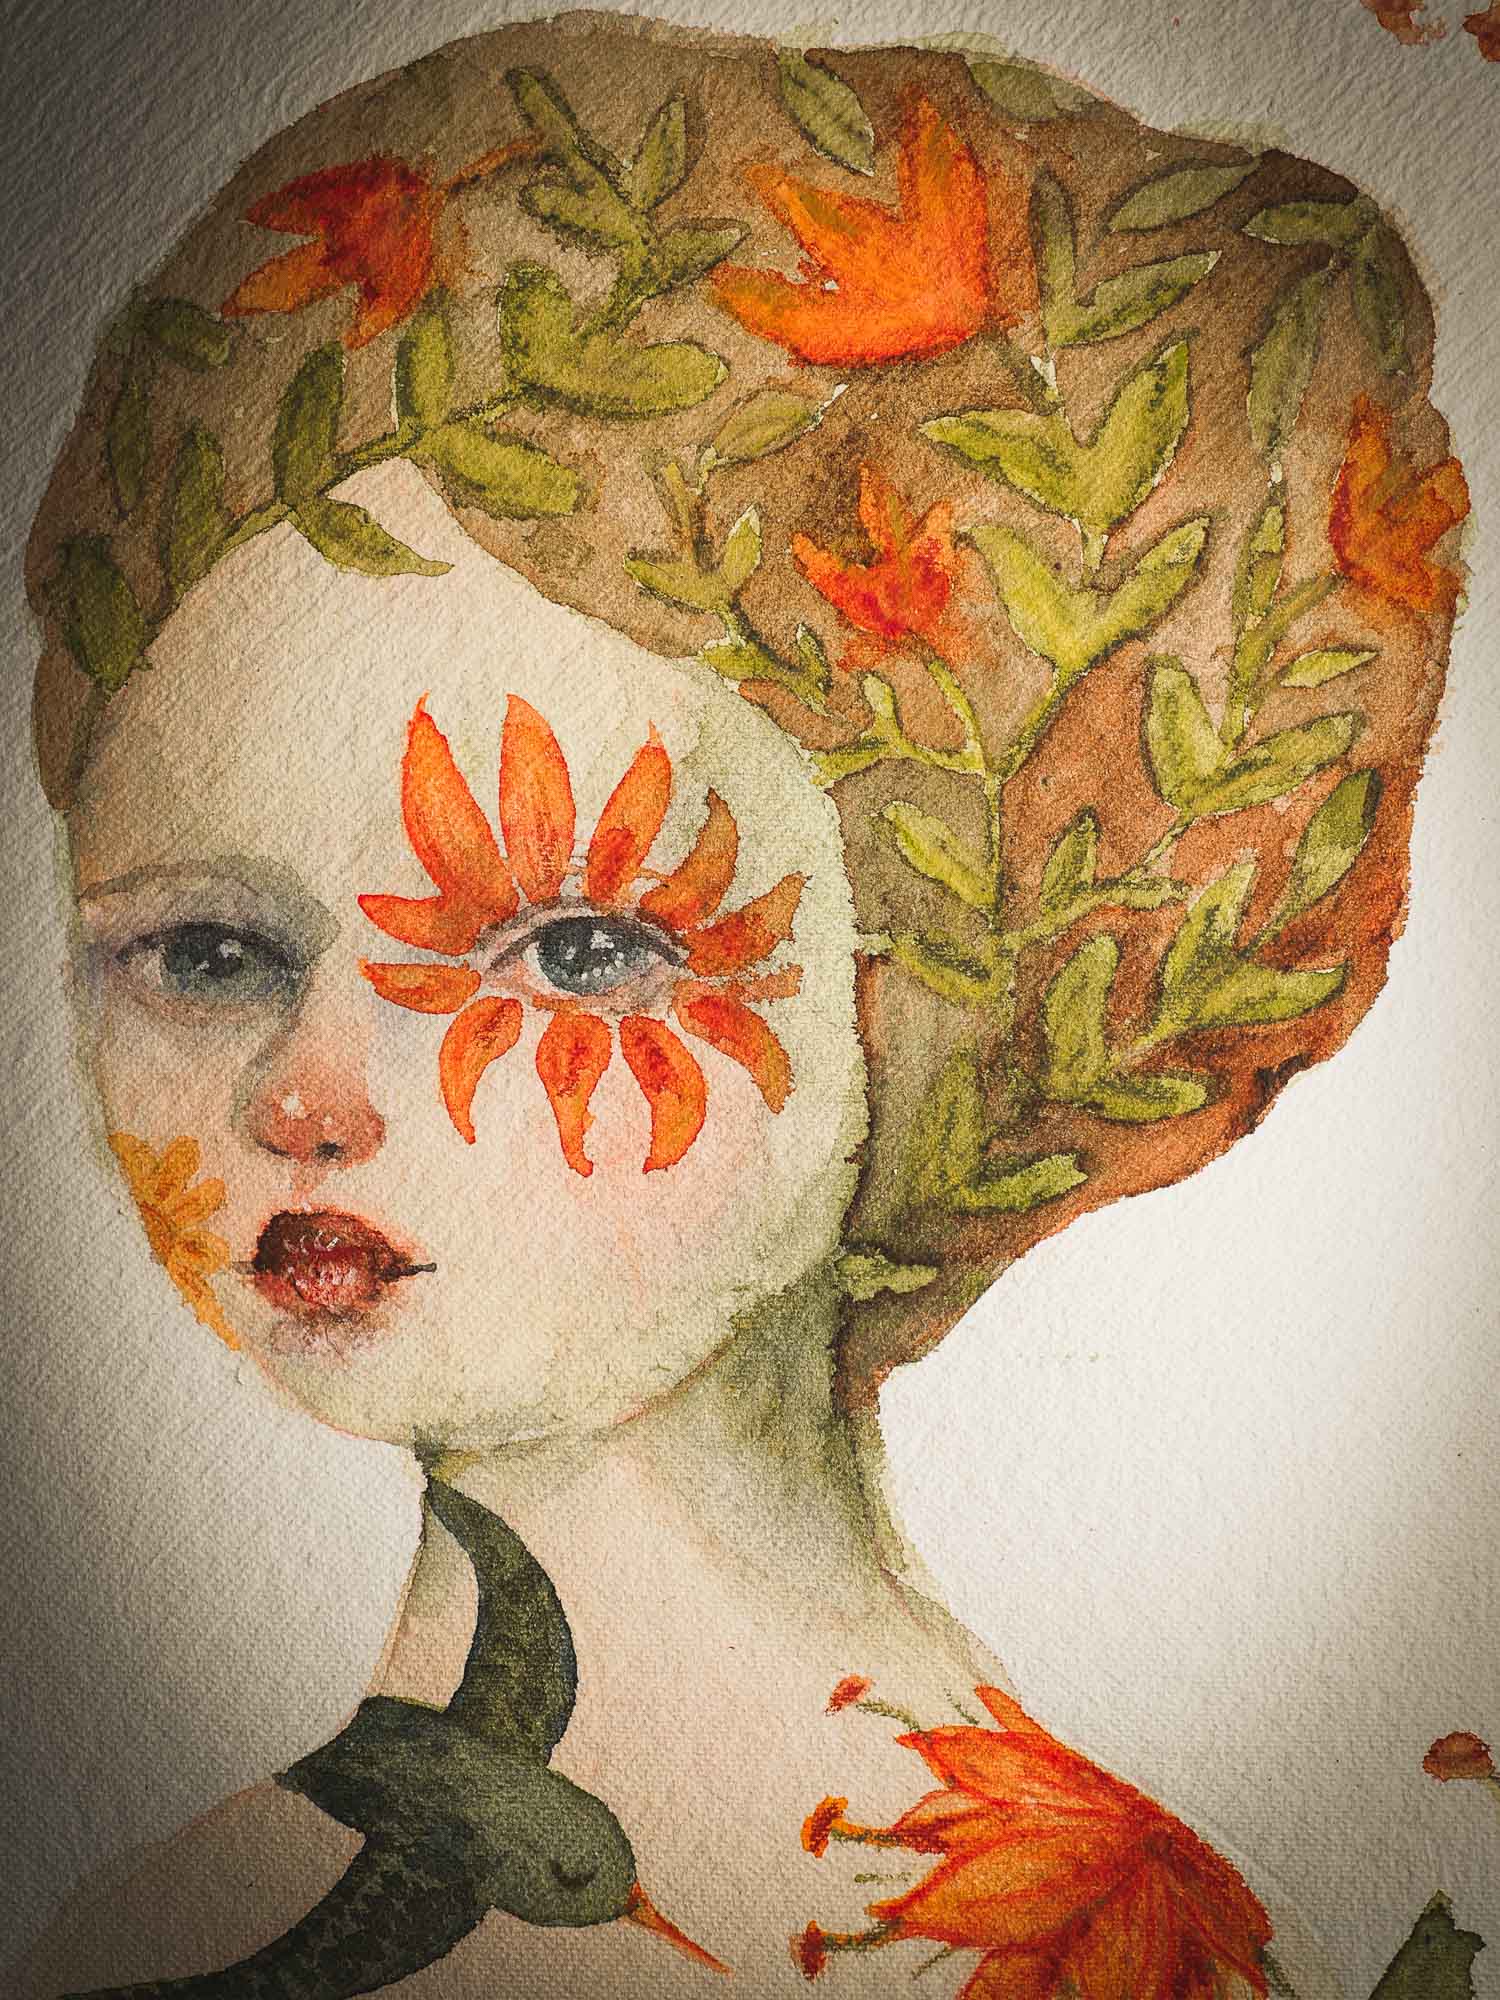 This original Idania Salcido (Danita Art) painting was made on a circular 12 x 12 Inch handmade watercolor paper, depicting a beautiful woman representing mother nature, with a wreath around it, orange flowers in her hair, a flower around her eye and a flying green bird at her shoulder.